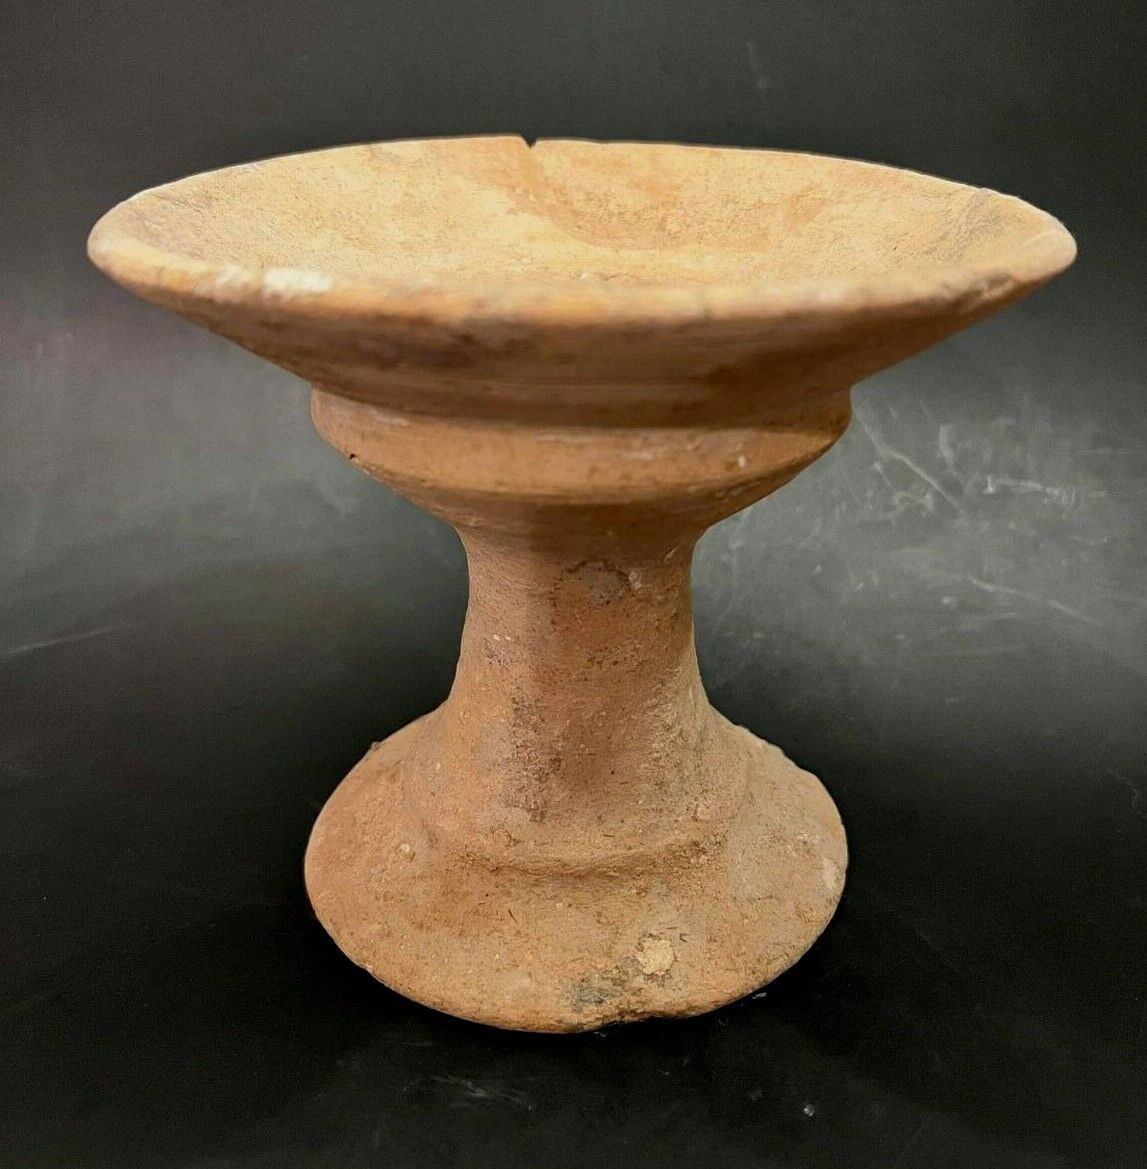 Ancient Middle Eastern/Holy Land Pottery Chalice or Tazza - 1200 BC to 700 BC